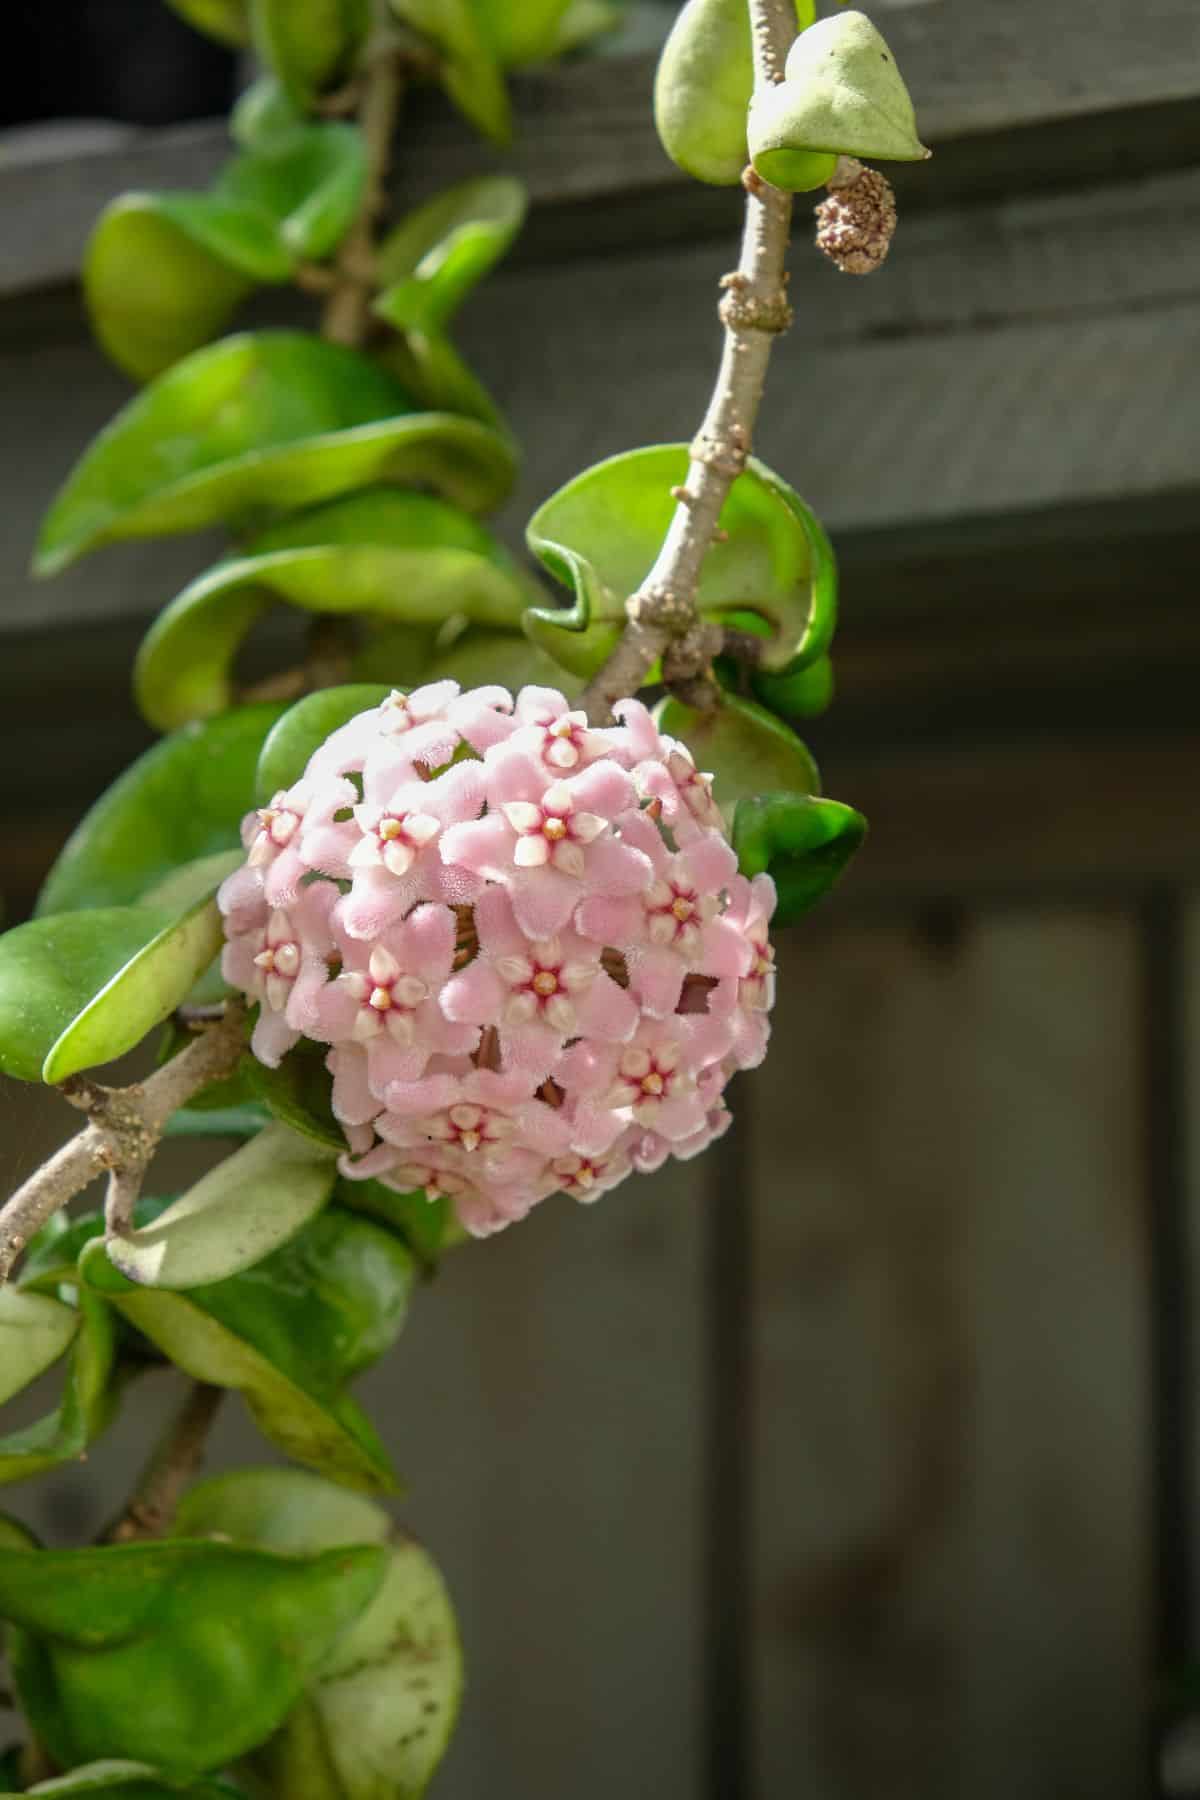 Hoya carnosa ‘Compacta’ with a cluster of pink flowers.